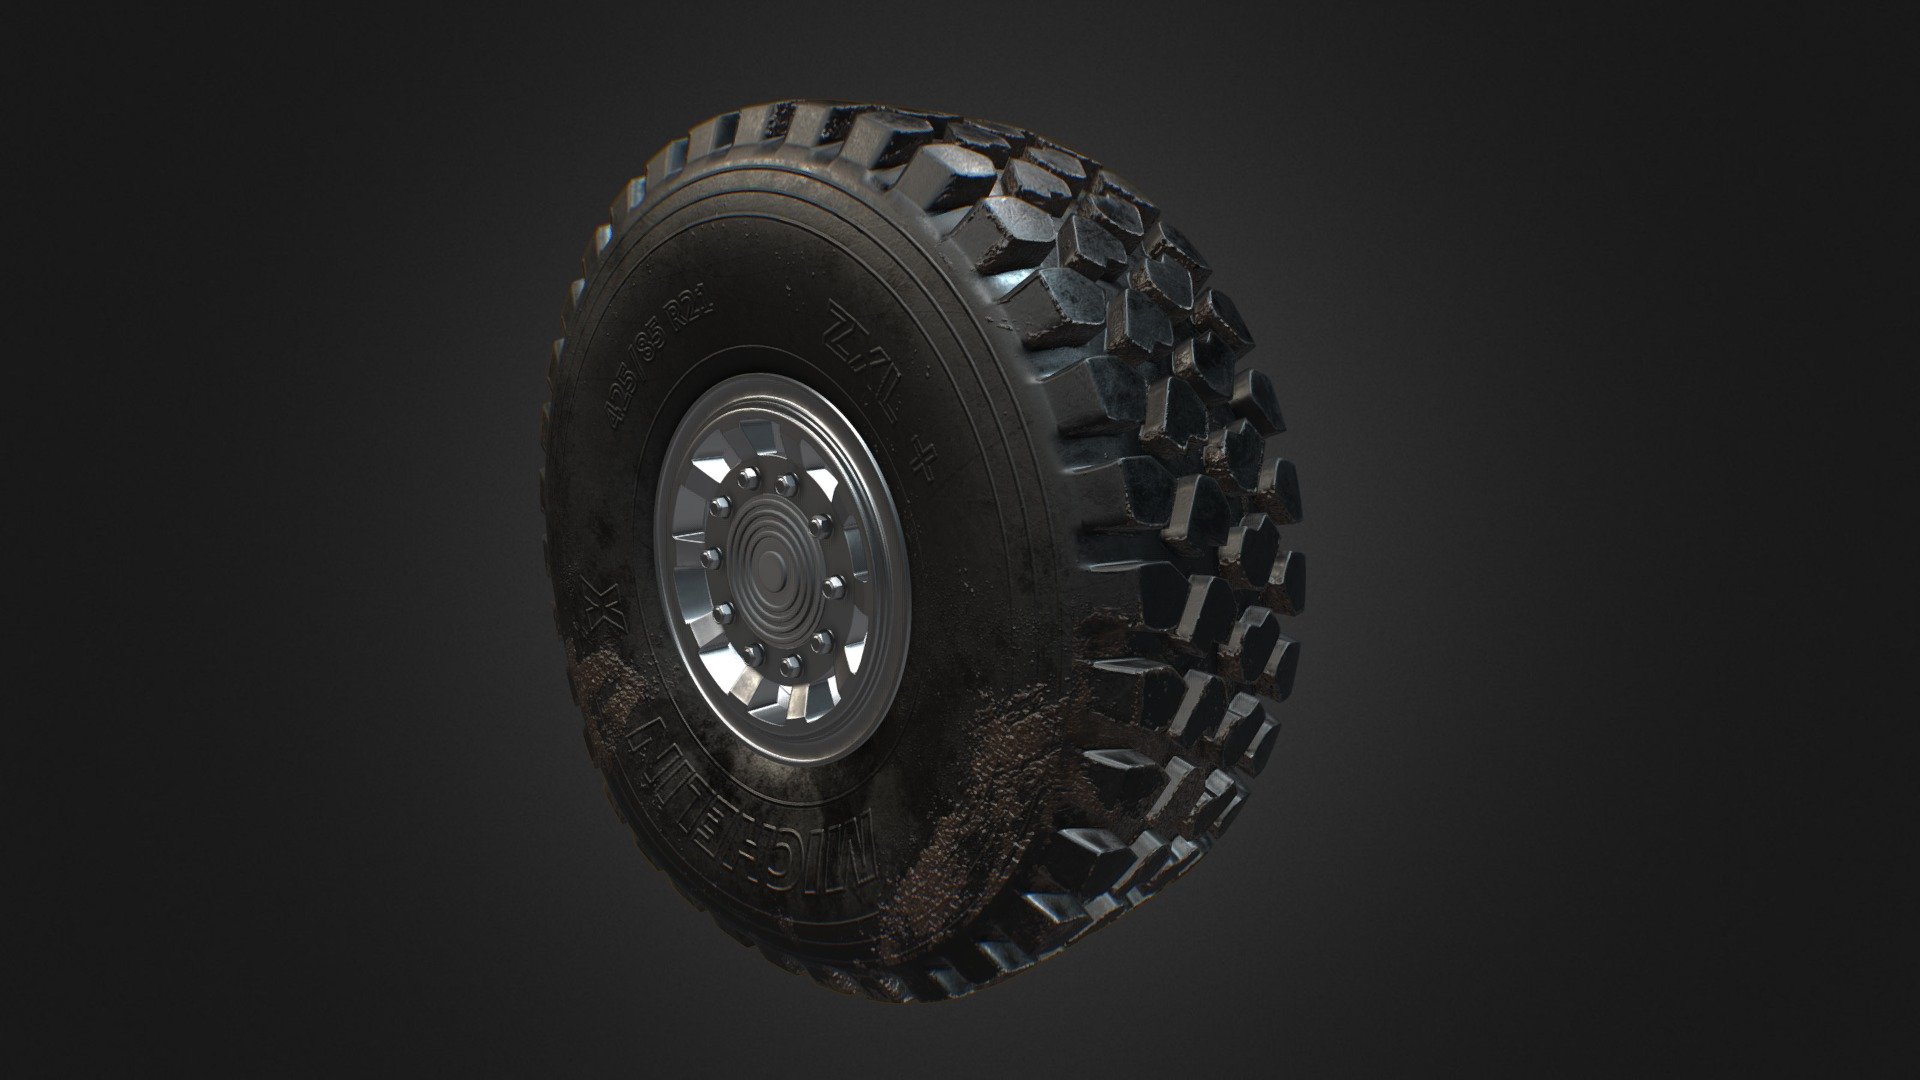 MICHELIN X OFFROAD TYRE 3d model

Dakar trucks (like Kamaz team etc.) and special military trucks (like Falcatus) use this tire.

MICHELIN X OFFROAD TIRE 3d model is a high quality and photo-real model. It has a fully textured, detailed design that allows for close-up renders so it will enhance detail and realism to your projects.

WHAT DO YOU GET: - Two types of a wheel model: loaded rubber (pressured) and unloaded rubber (not pressured) - 4 different PBR shaders (metallic/roughness) of a dirty rubber for every wheel (4x color maps, 4x metallic maps, 4x roughness maps, 4x normal maps, 4x height maps) which you can use in every contemporary renderers and game engines.

SPECIFICATIONS

Tire: 26,112 polygons Disc: 11,500 polygons Screws: 2,010 polygons Cap: 1,679 polygons

All textures have a 4k resolution (4096x4096 pixels)

All parts of the model have a UV mapping and Non-overlapping unwrapped UVs

Hope you like it and happy rendering! - MICHELIN X OFFROAD TIRE DIRTY - 3D model by Arseny Lavrukhin (@alav) 3d model